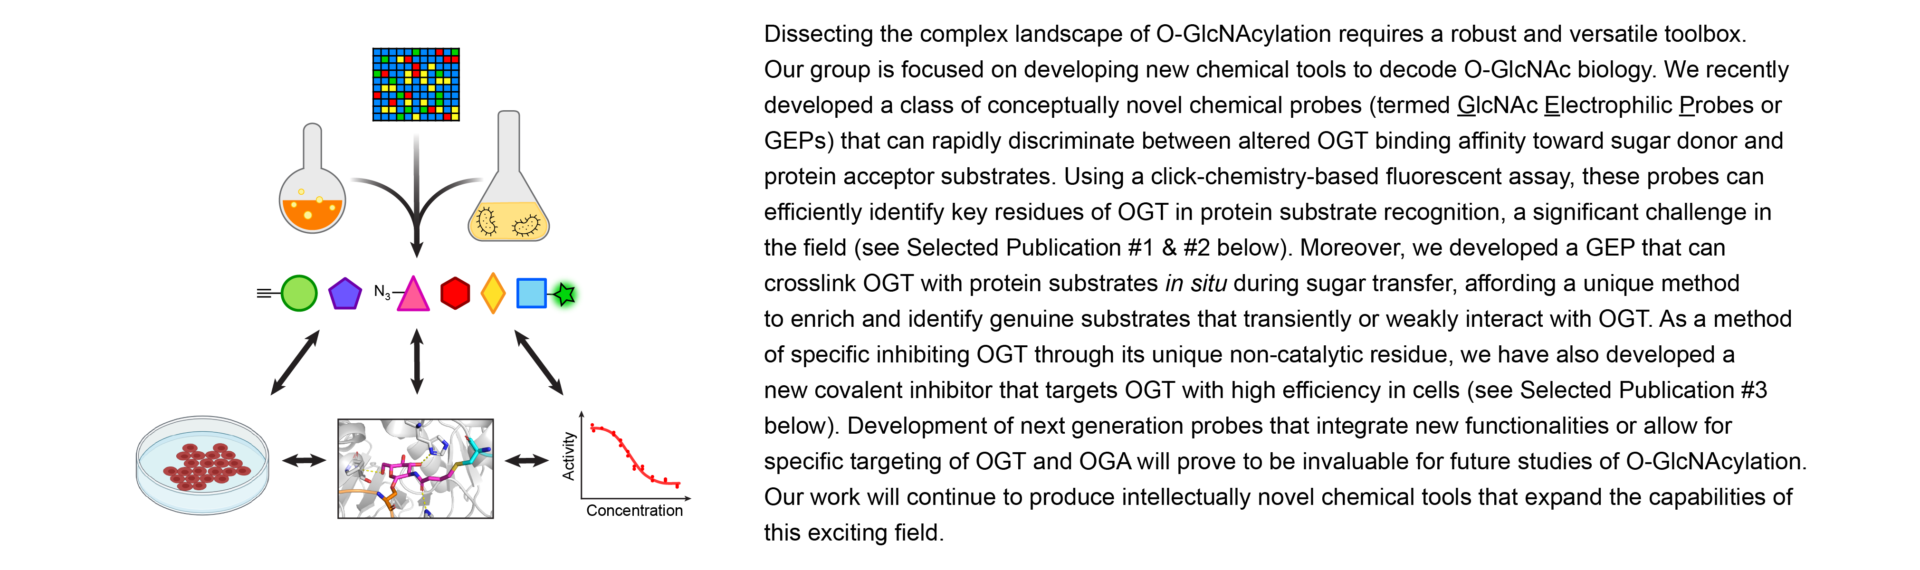 Research text on O-GlcNAc